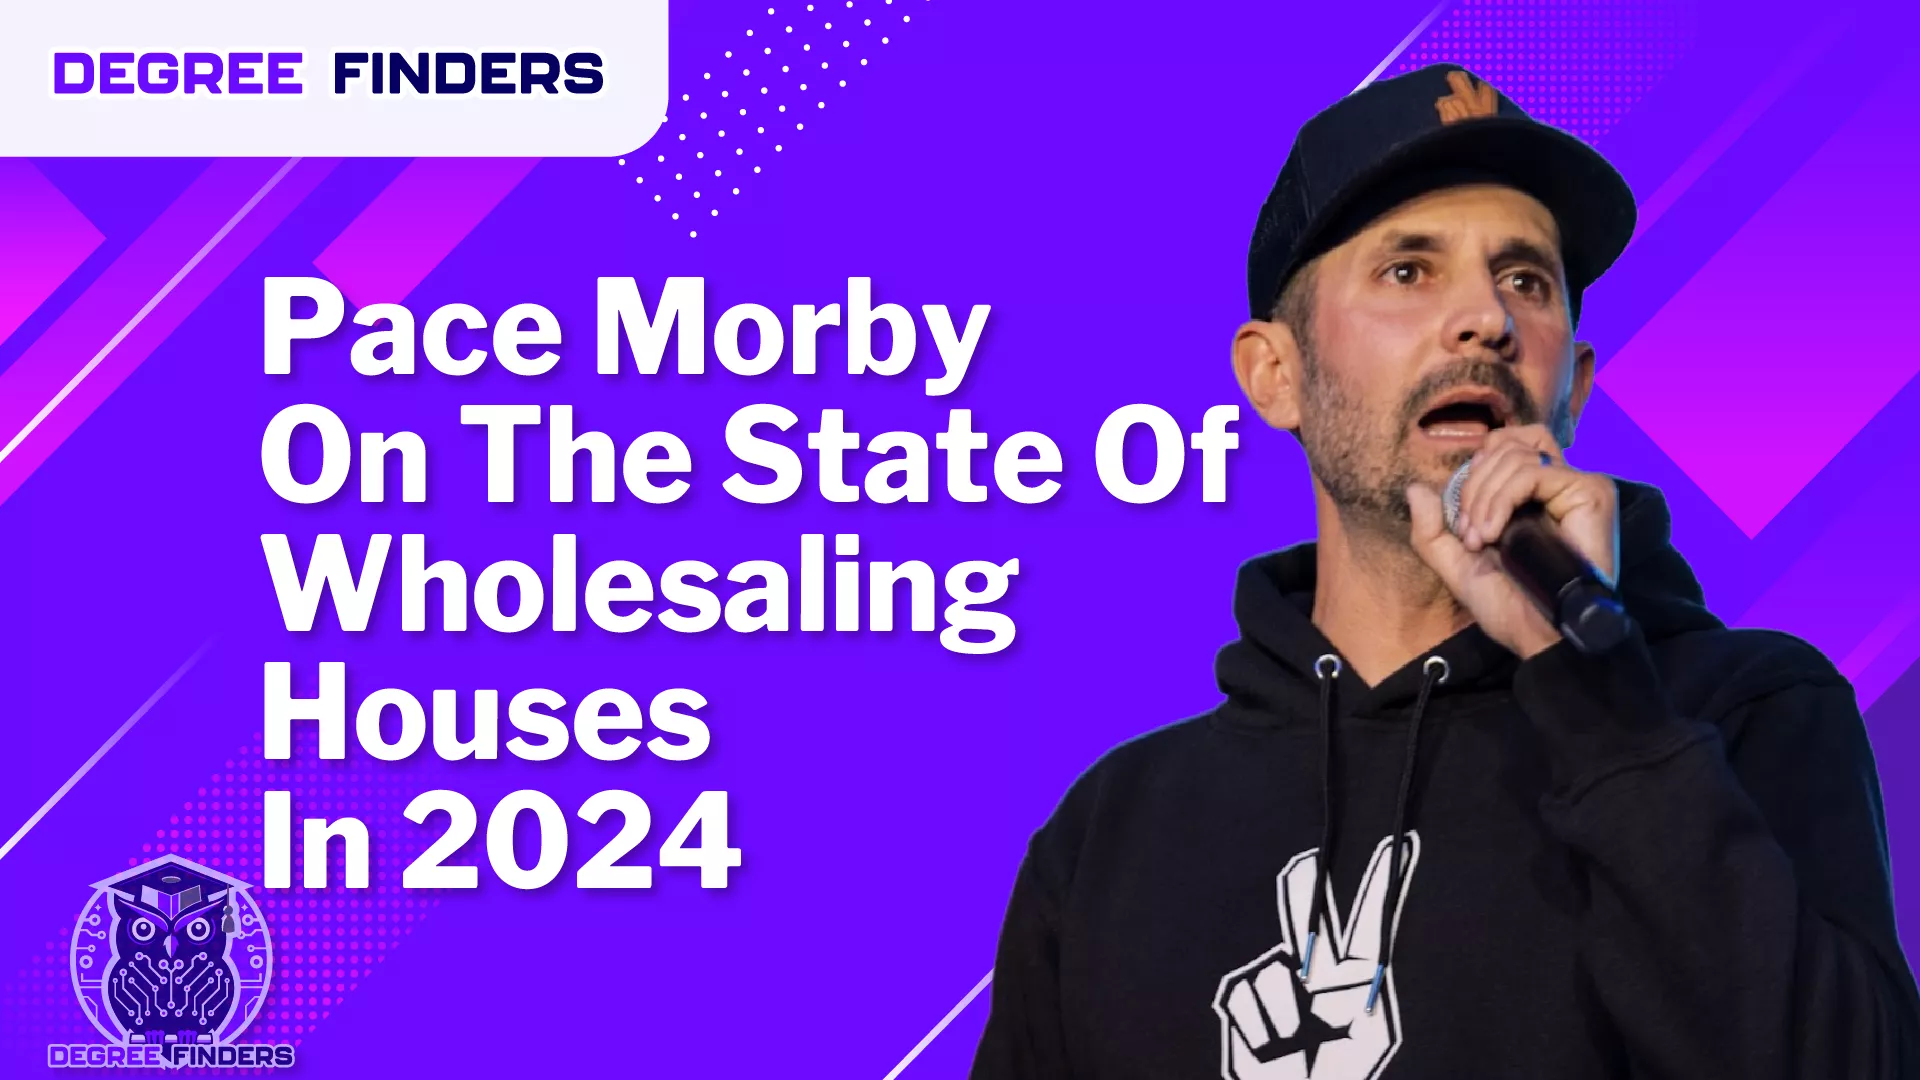 Pace Morby On The State Of Wholesaling Houses In 2024